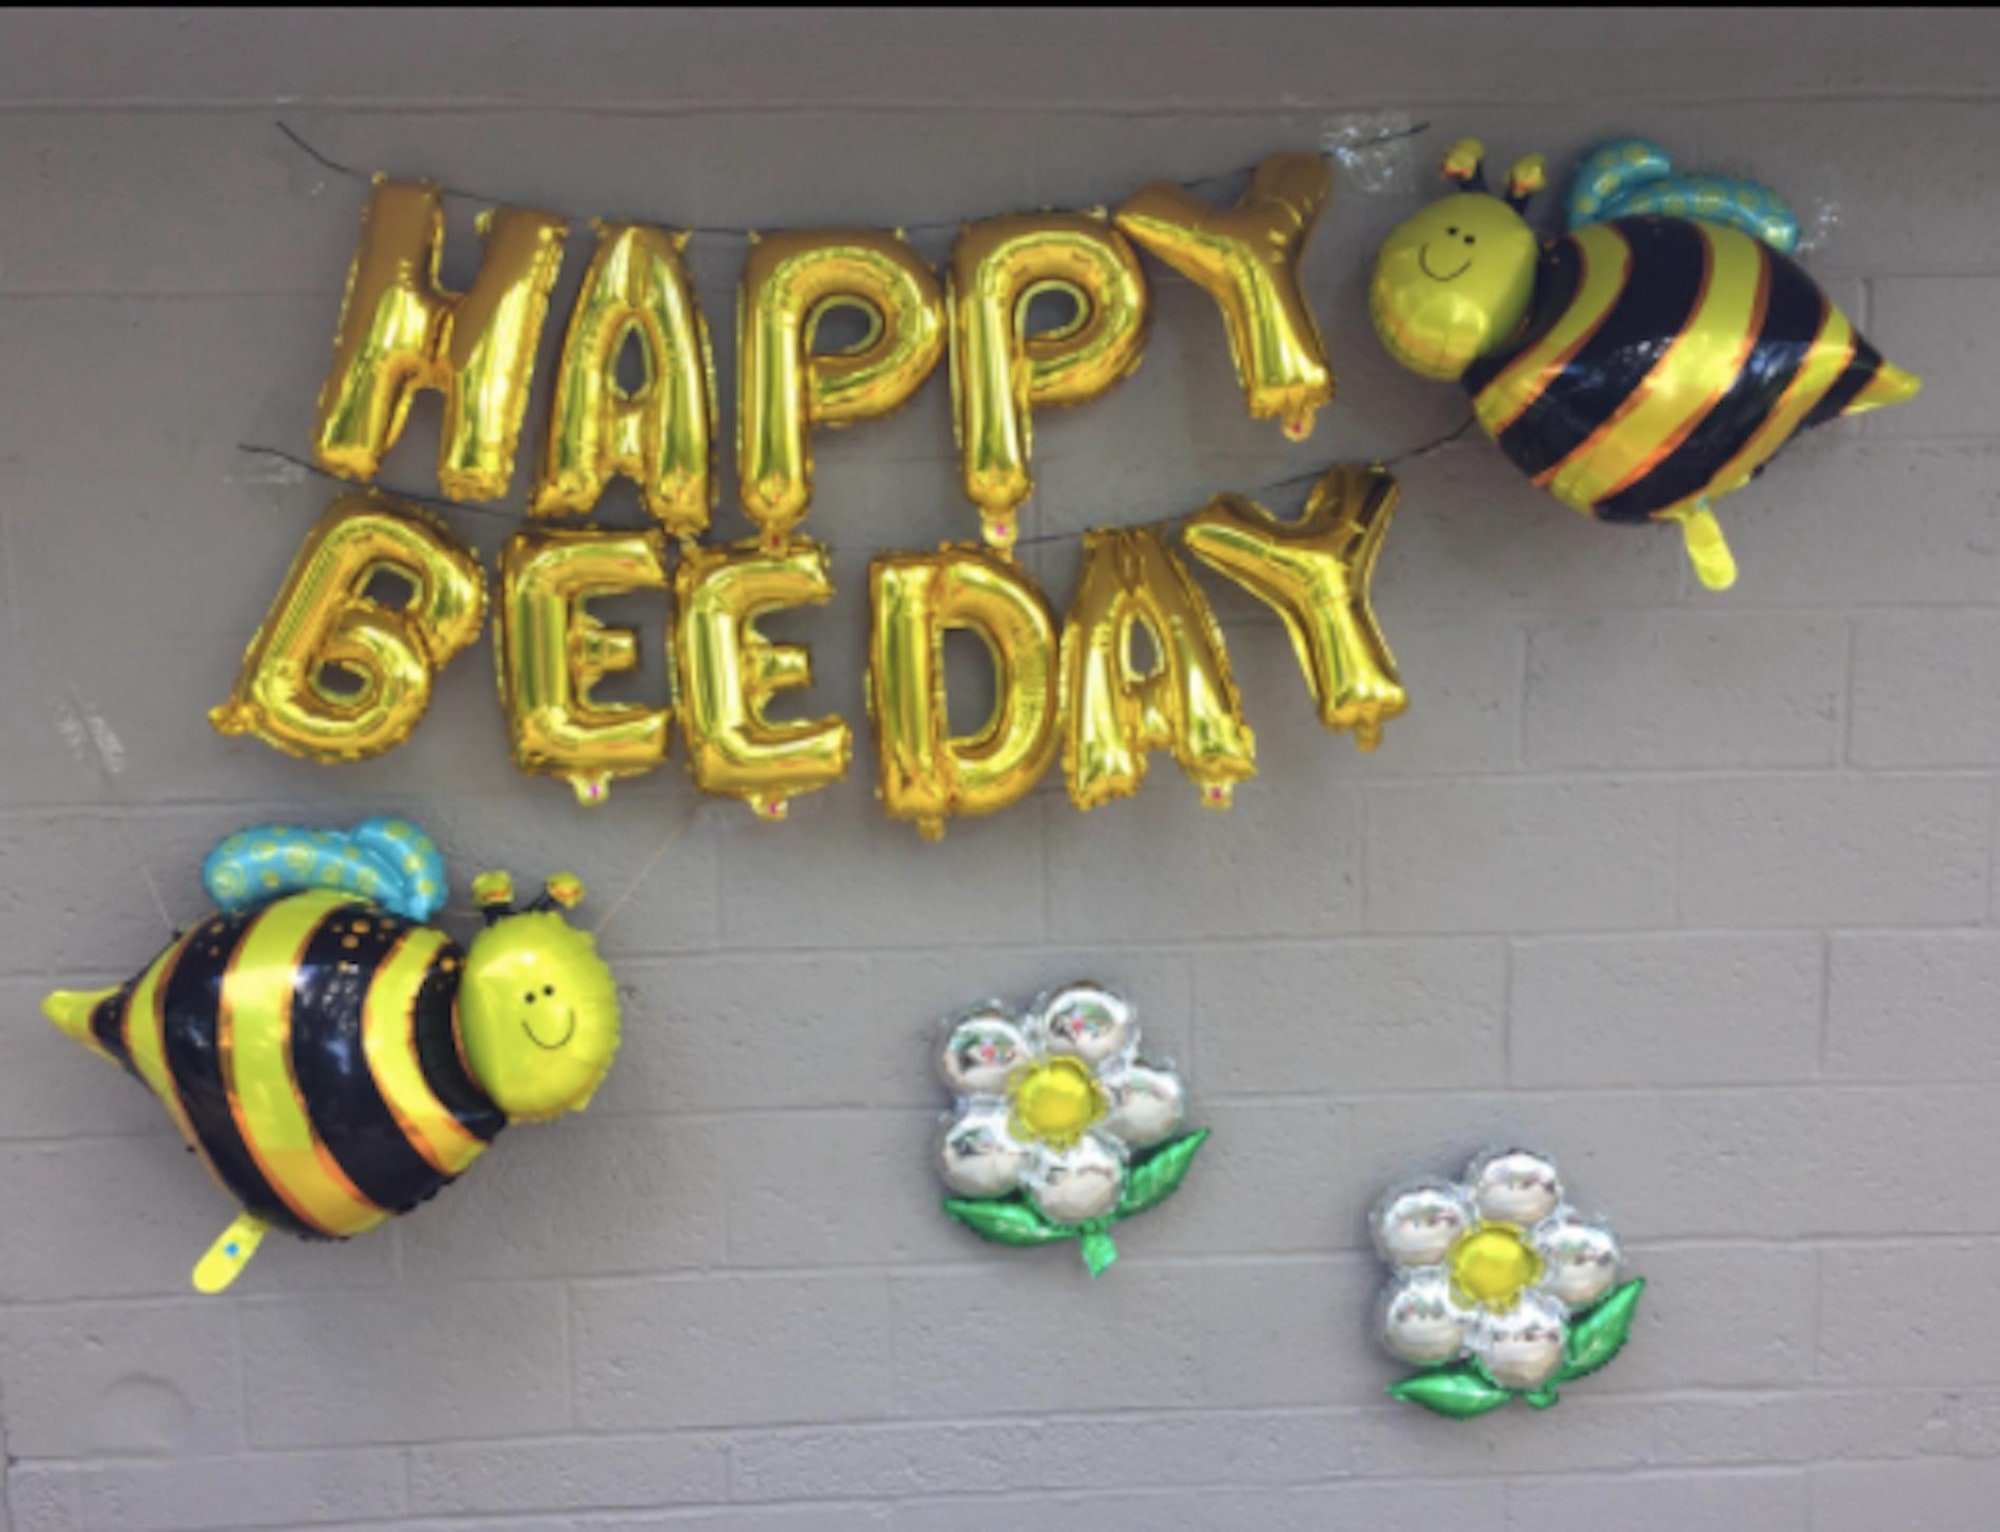 Ghyt Happy Bee Day Balloons Set - 32 Inch, Bee Balloon For Cute Be